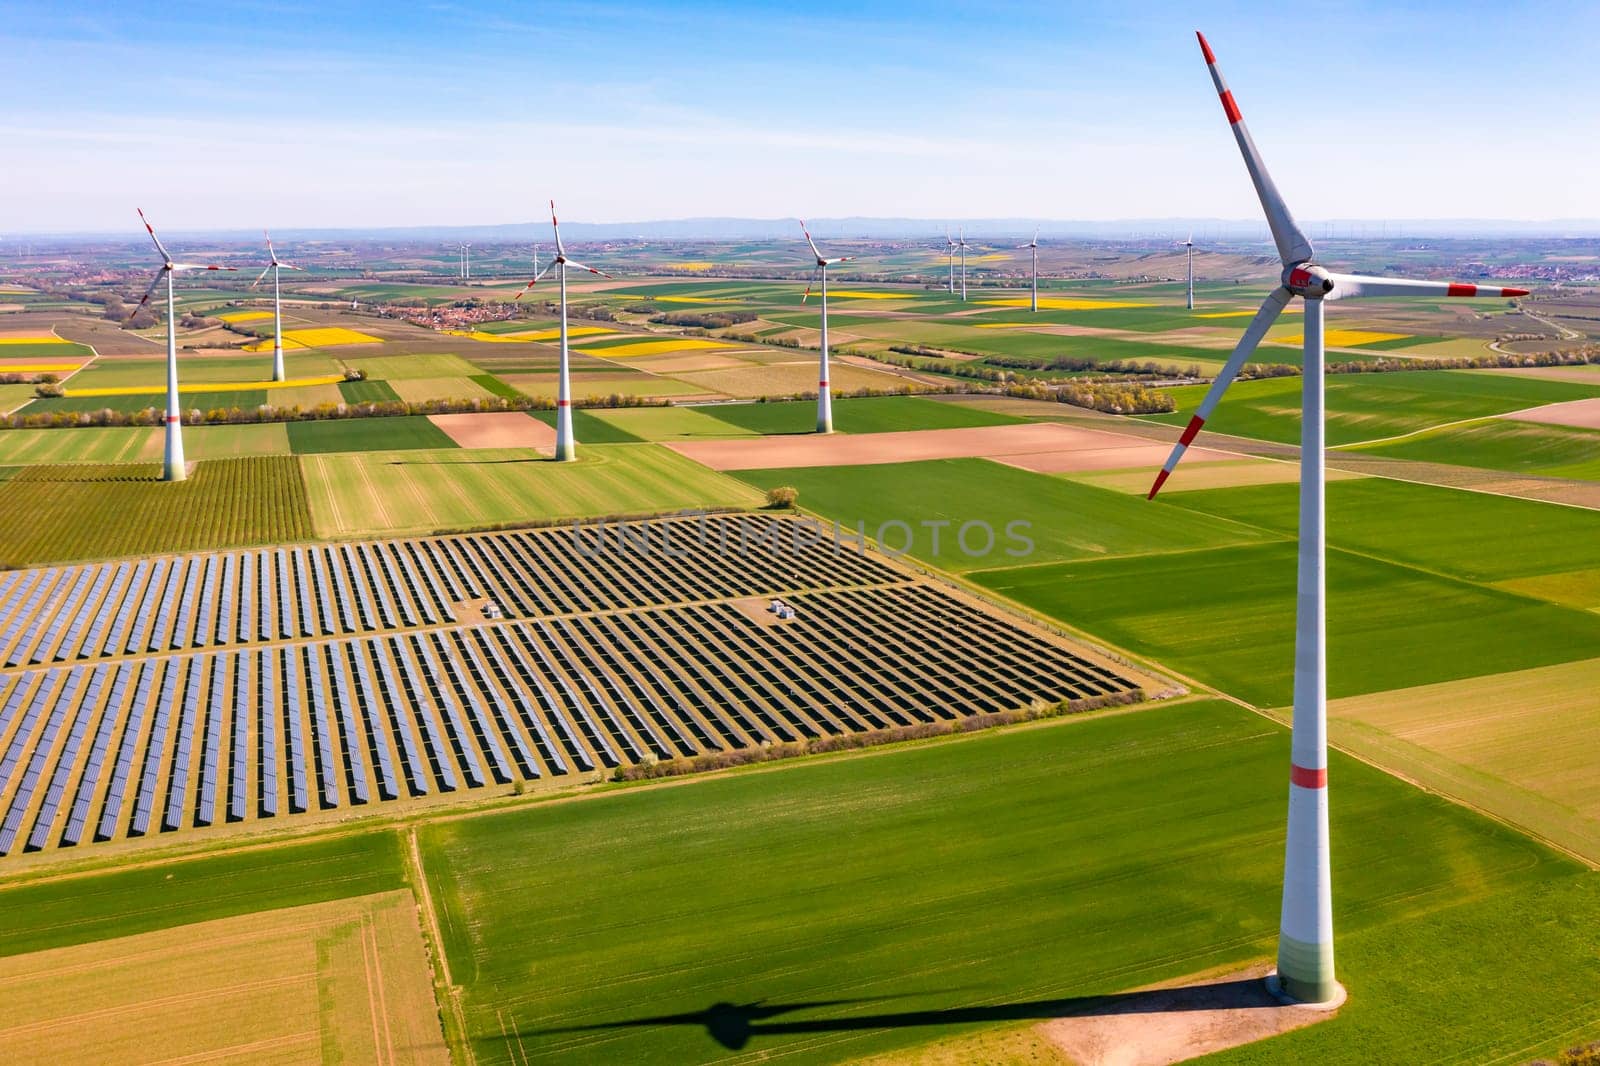 Aerial view of huge wind turbines between agricultural land and a solar park in rural area, Germany by astrosoft